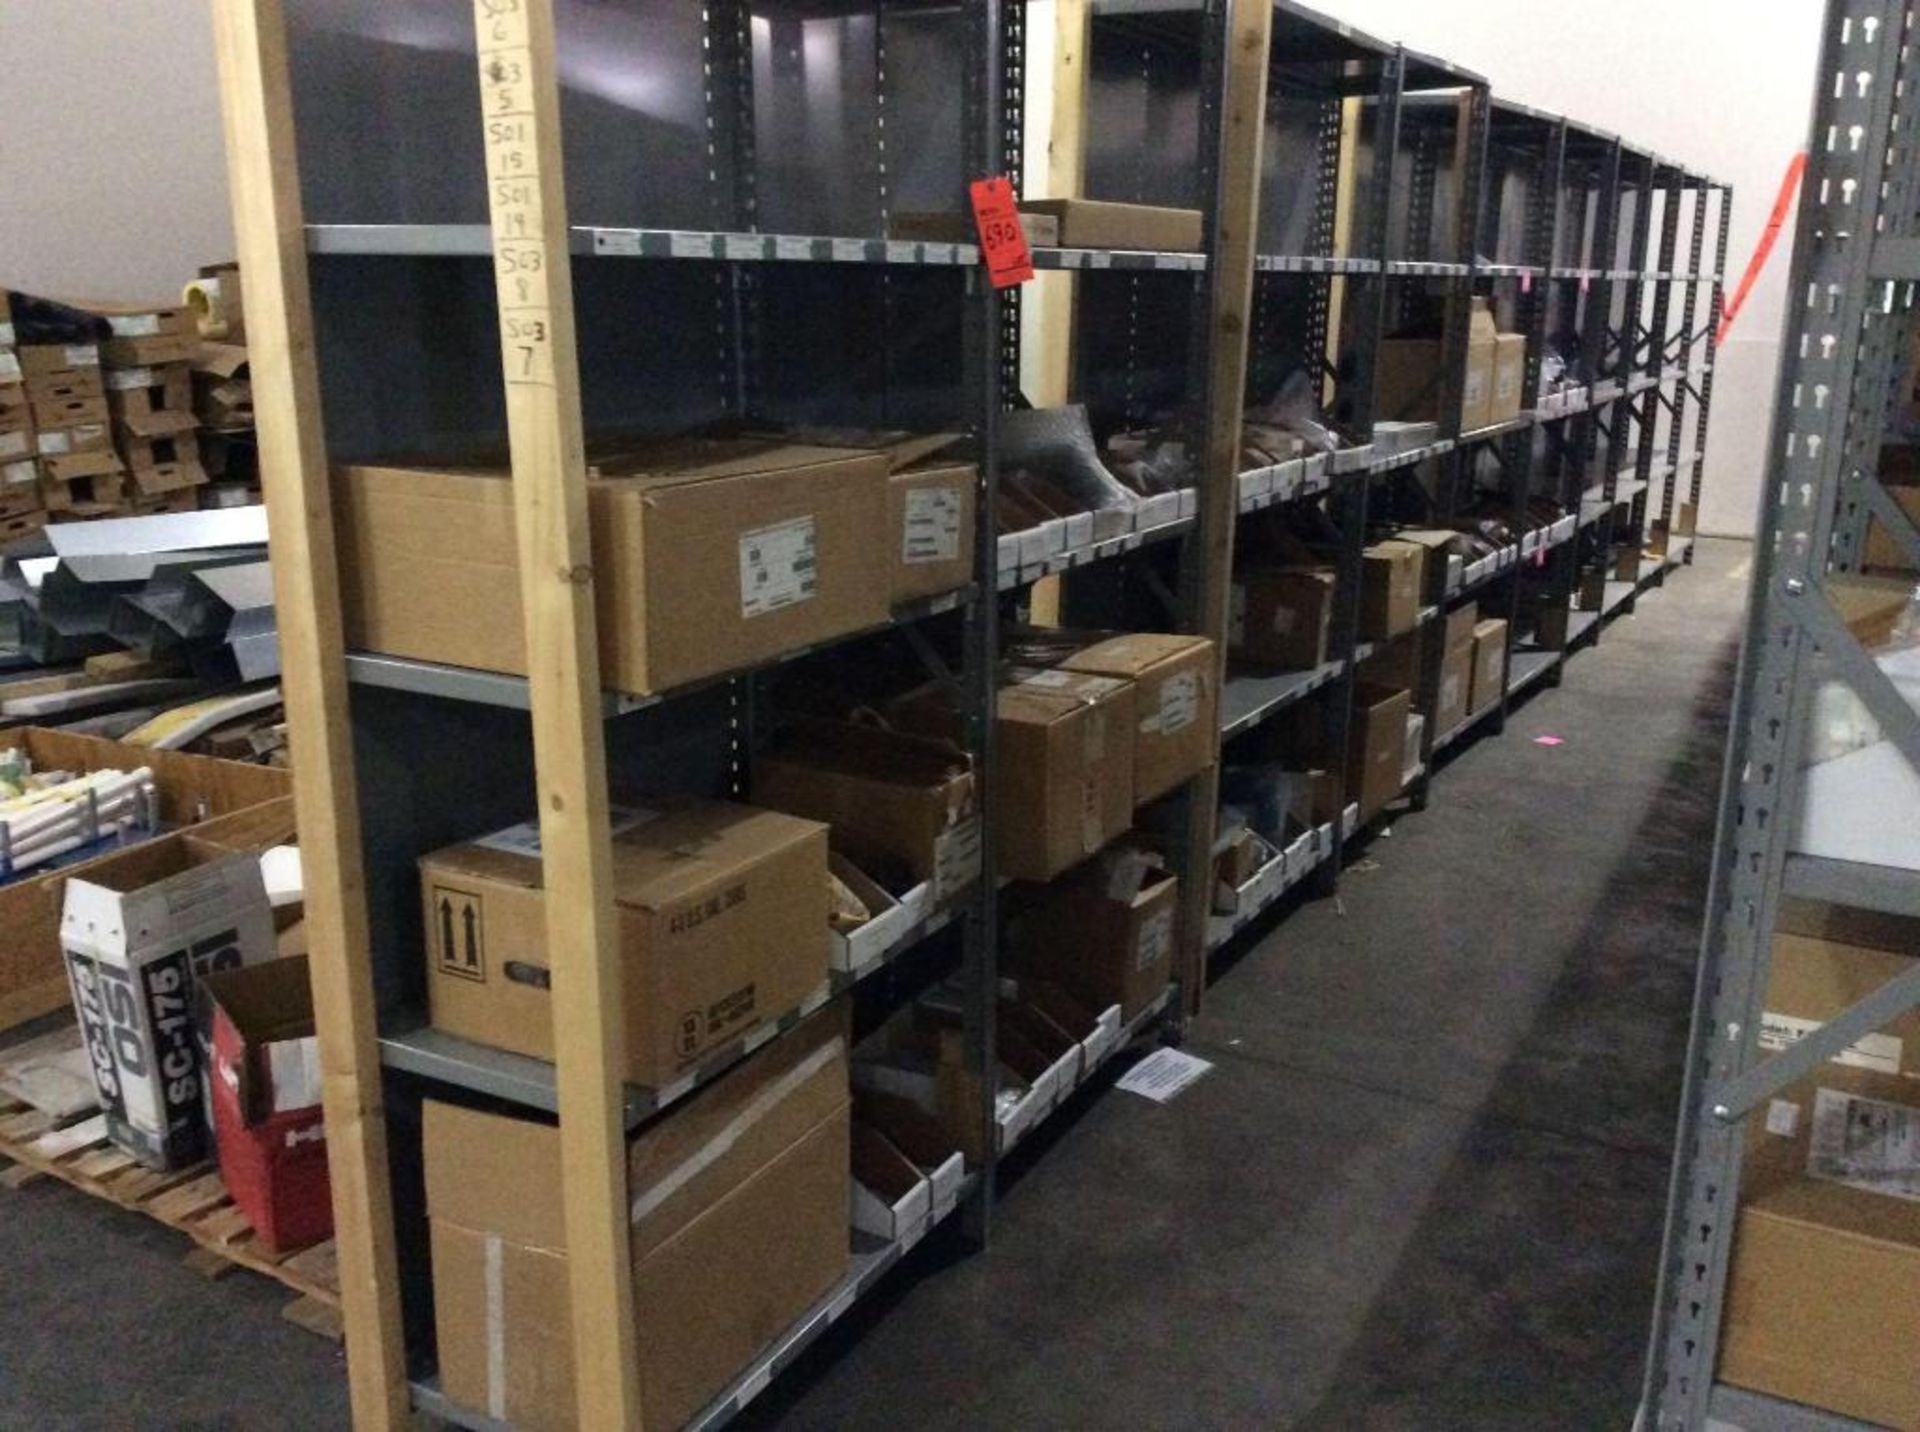 Lot of asst parts and components, contents of 4 rows of shelving (SHELVING NOT INCLUDED)